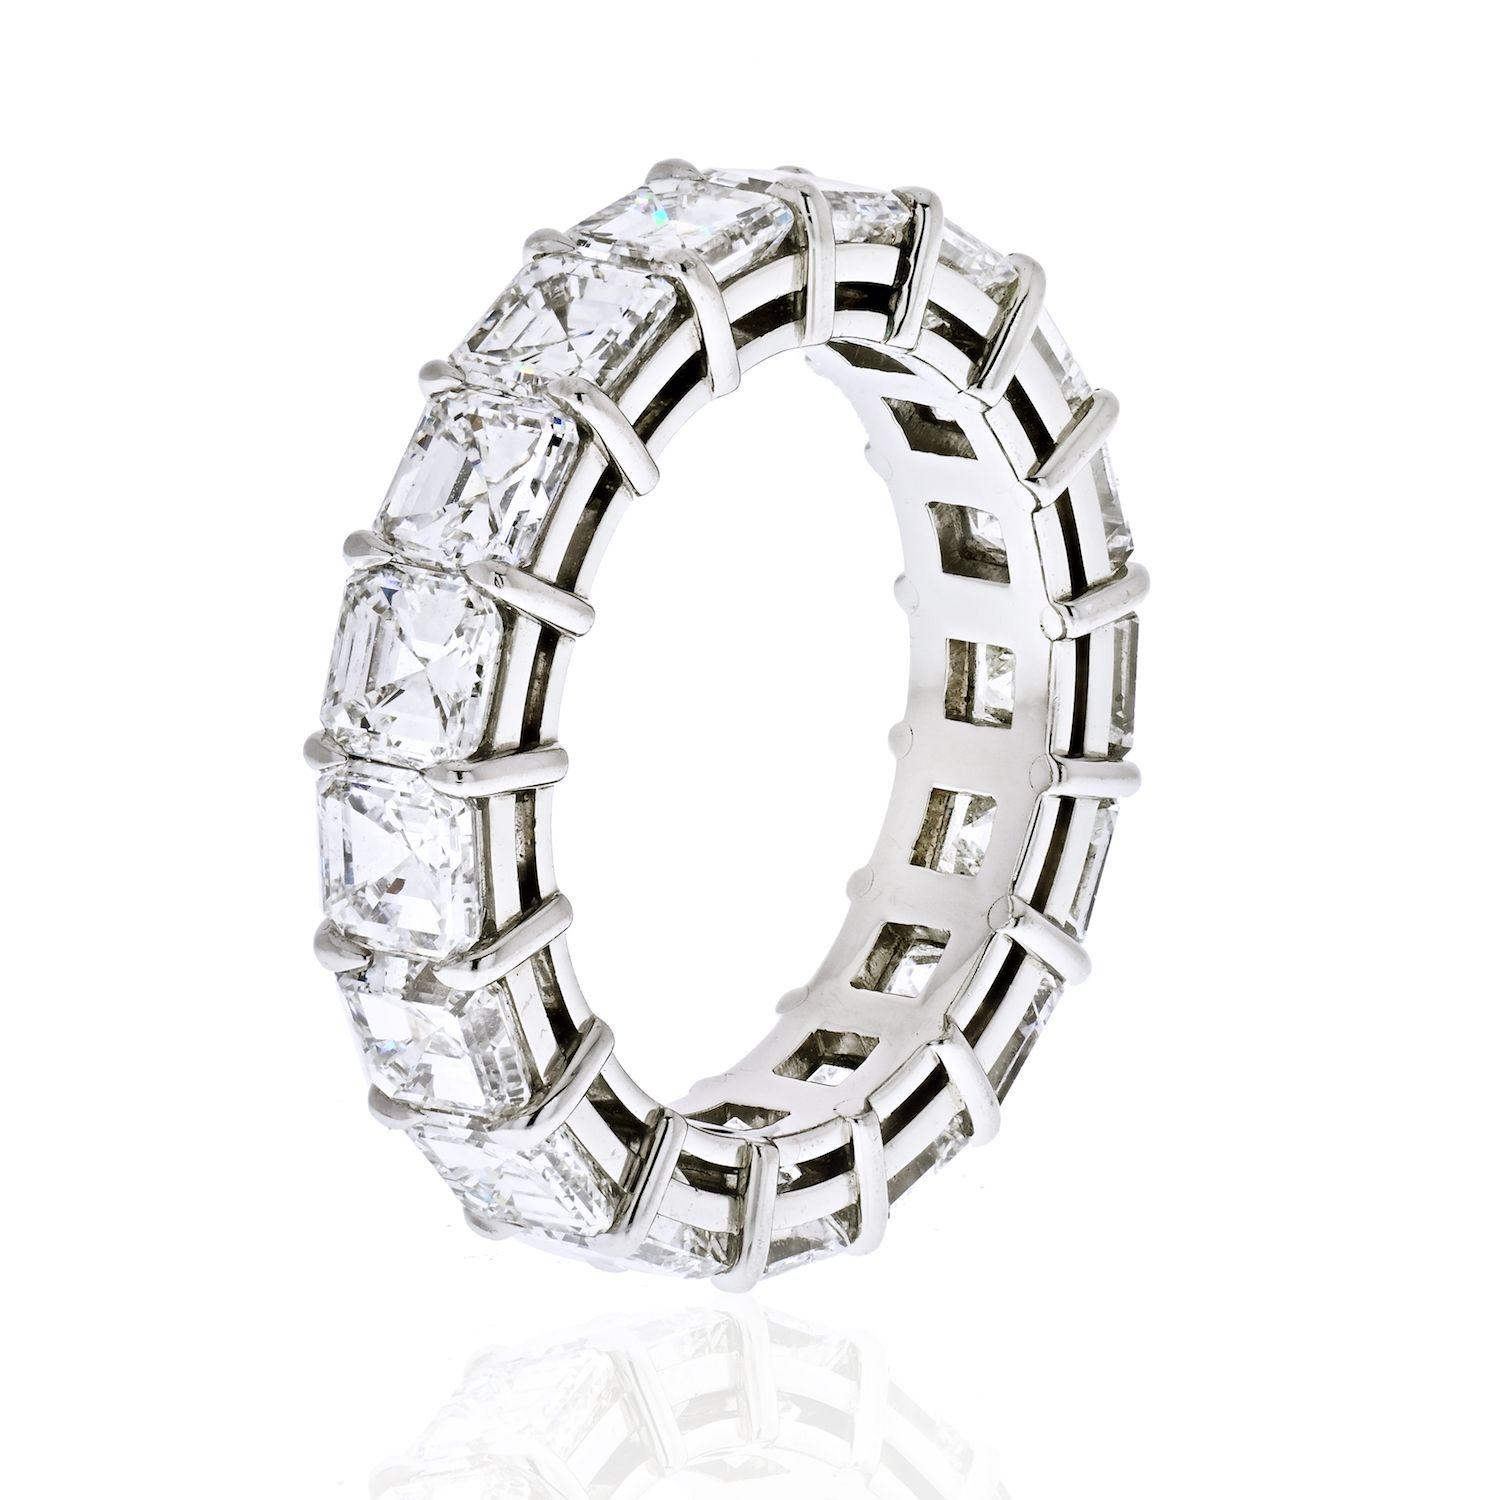 This is a superb, newly-crafted diamond eternity band rendered in rich platinum. Perfectly matched high-color, high-clarity asscher cut diamonds, totaling 7.65 carats, are each set individually within four secure prongs. This is a perfect match to